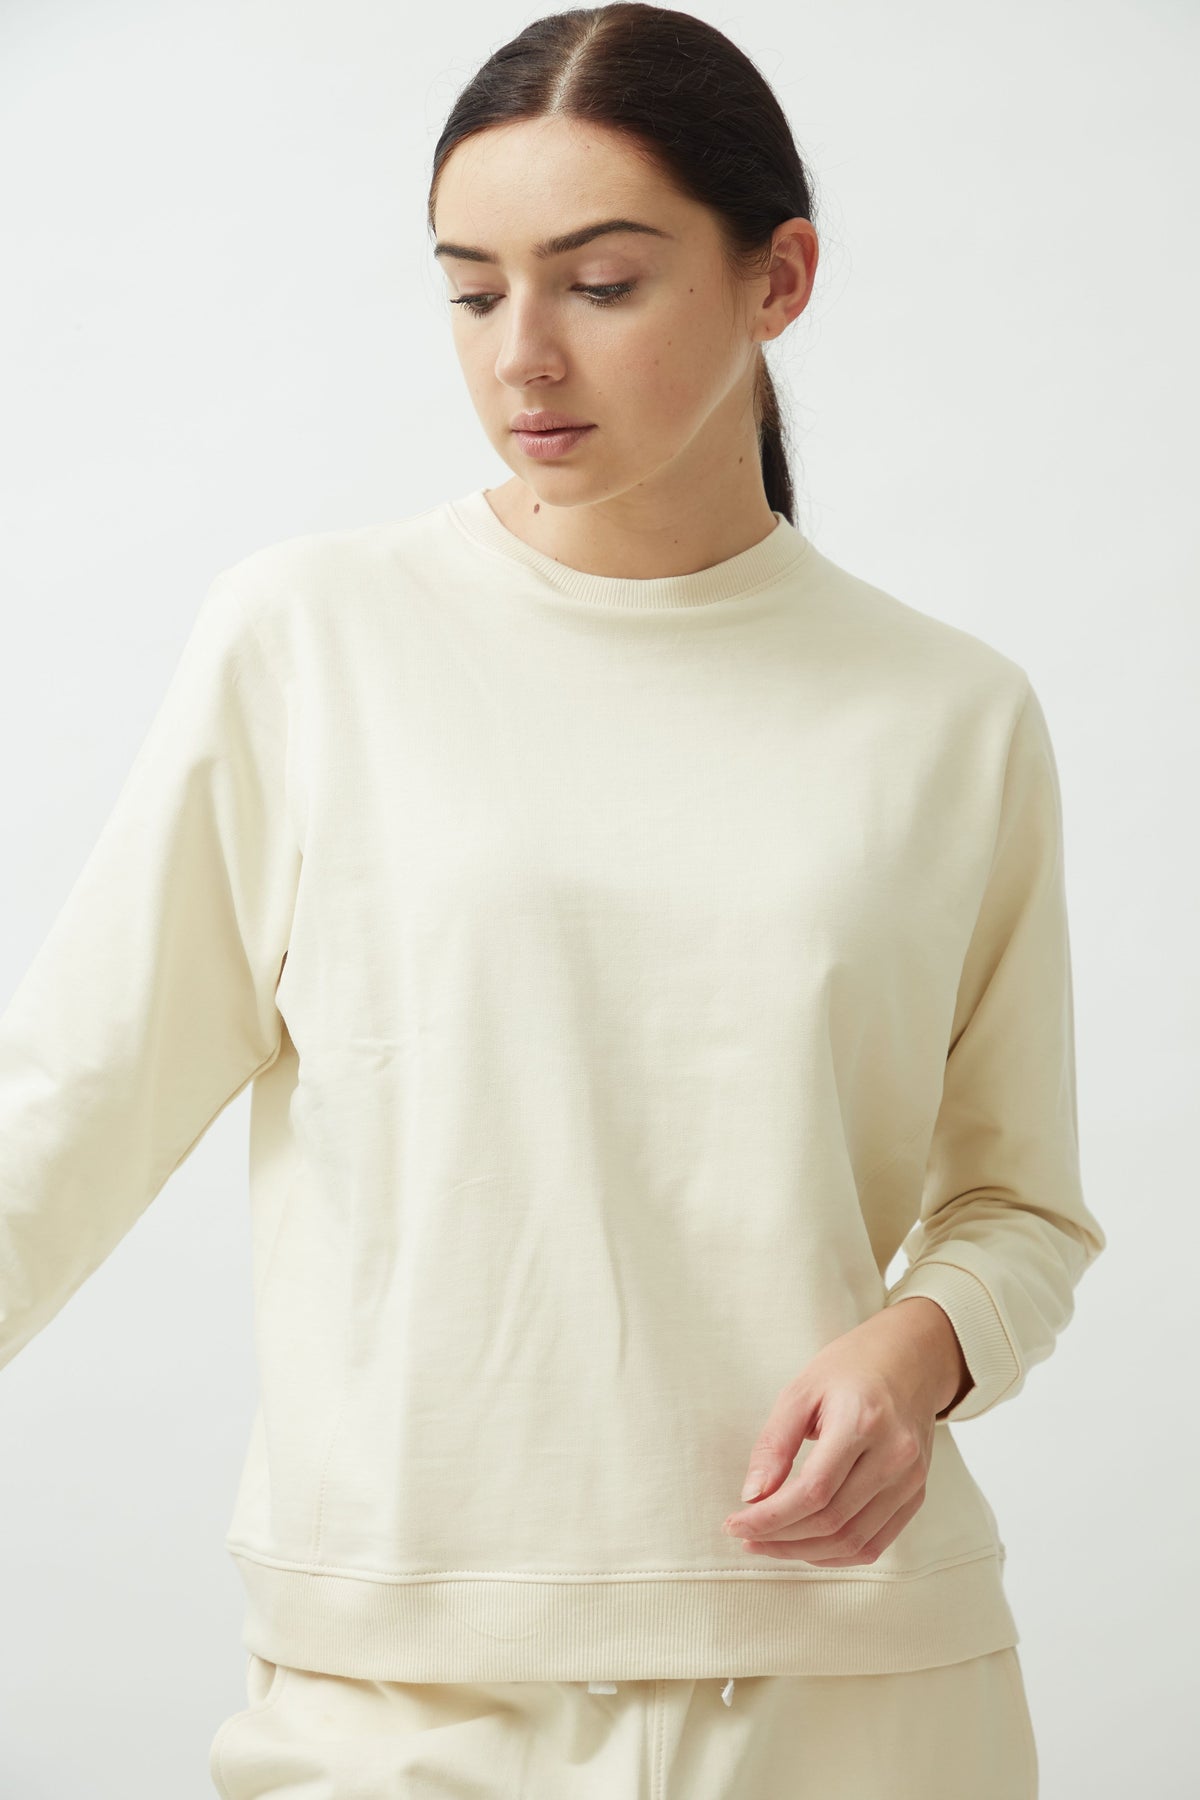 Saltpetre womens wear, lounge wear for casual wear. Comfortable pastel-themed sweatshirt in full sleeves co ord set in terracotta ecru cream colour. Made from 100% organic cotton.